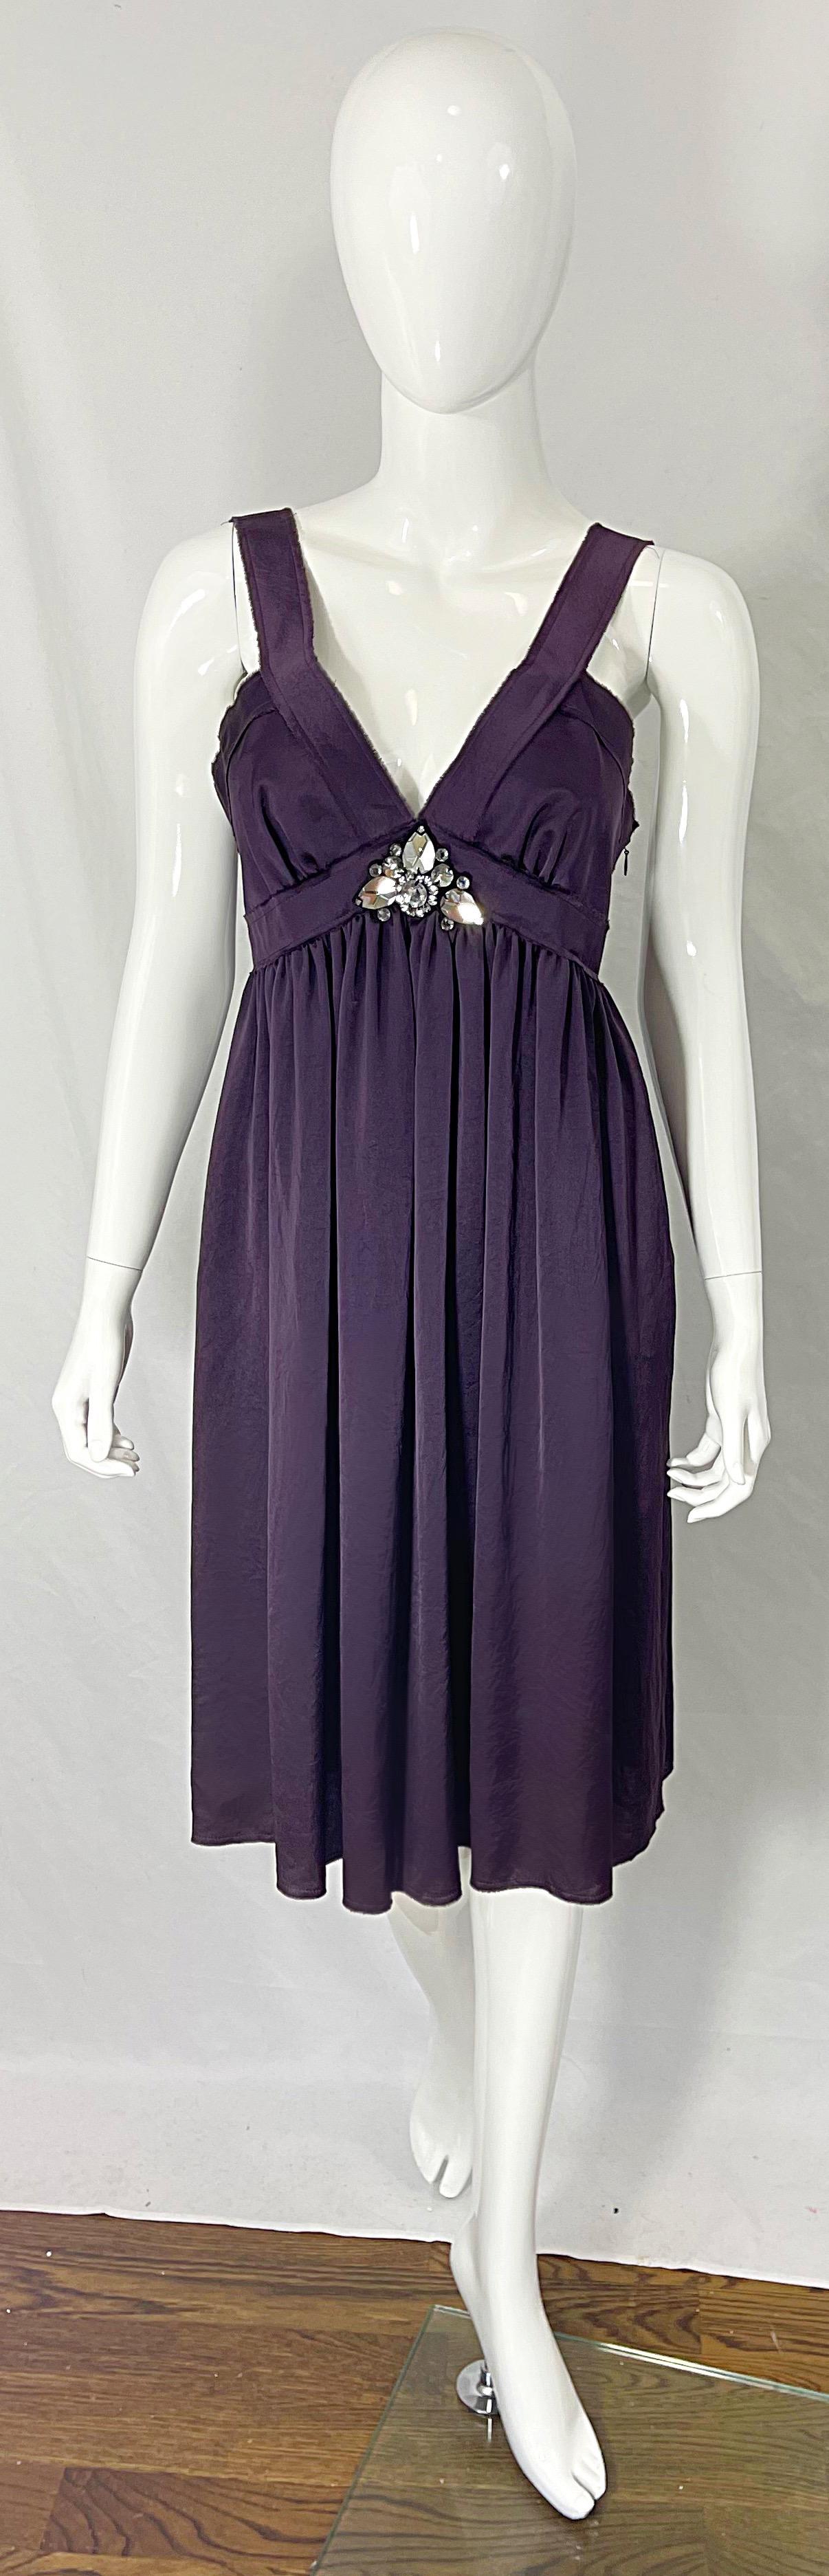 Beautiful LANVIN Spring / Summer 2007 Ete by ALBER ELBAZ purple / aubergine / eggplant rhinestone encrusted empire waist dress ! Tailored bodice with a free flowing body. Large rhinestones at center bust. Hidden zipper up the side with hook-and-eye